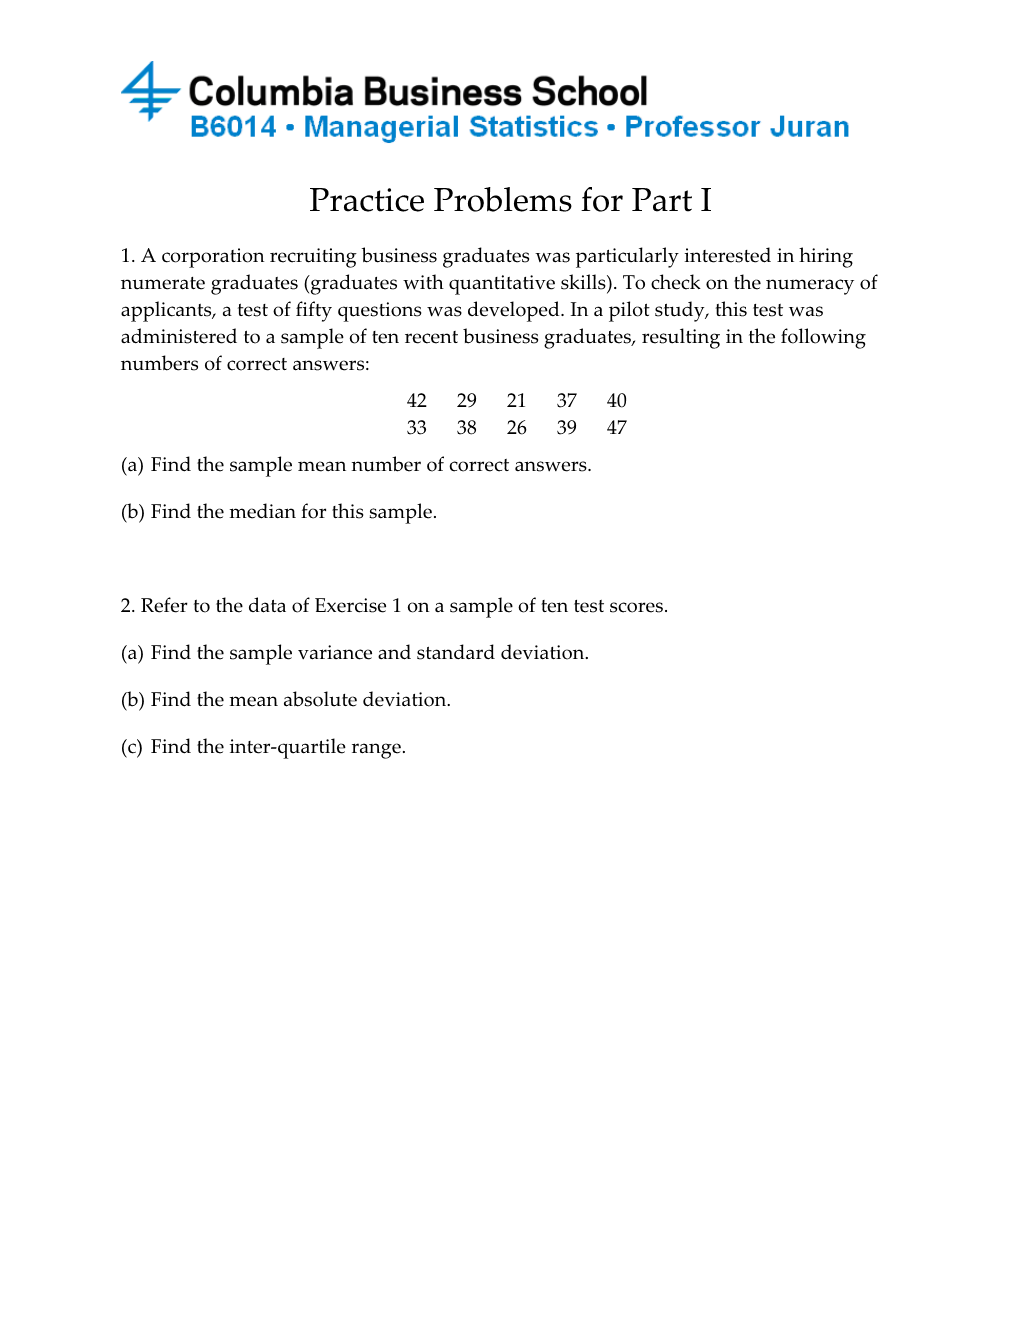 Practice Problems for Part I